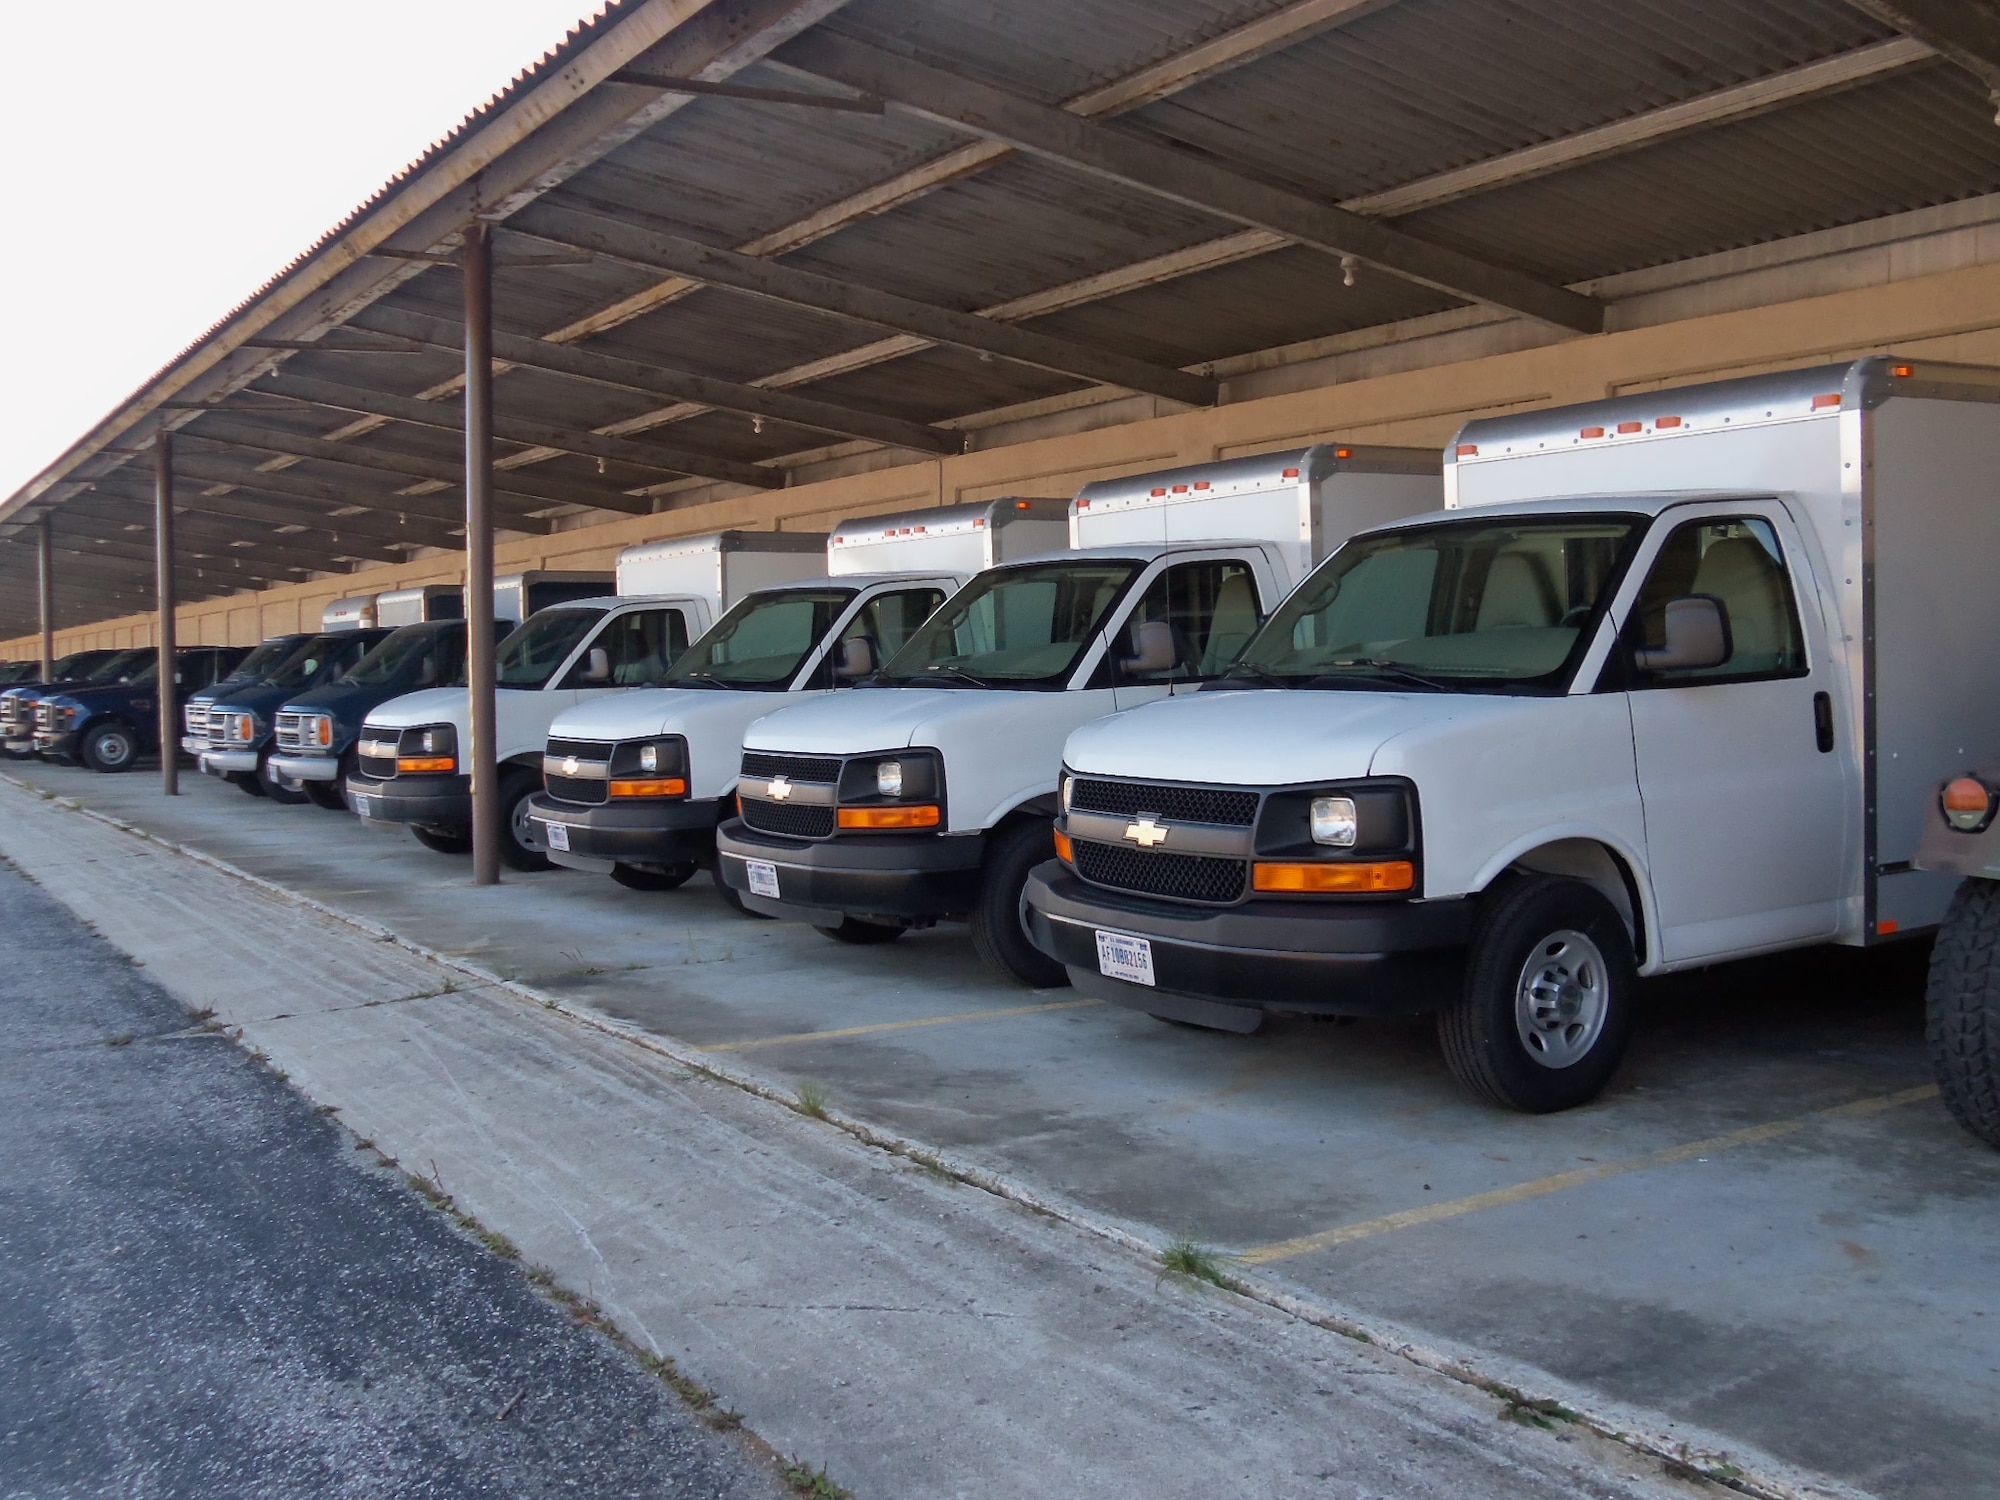 The Alpena CRTC Vehicle Maintenance team can provide vehicles to suit any group need.